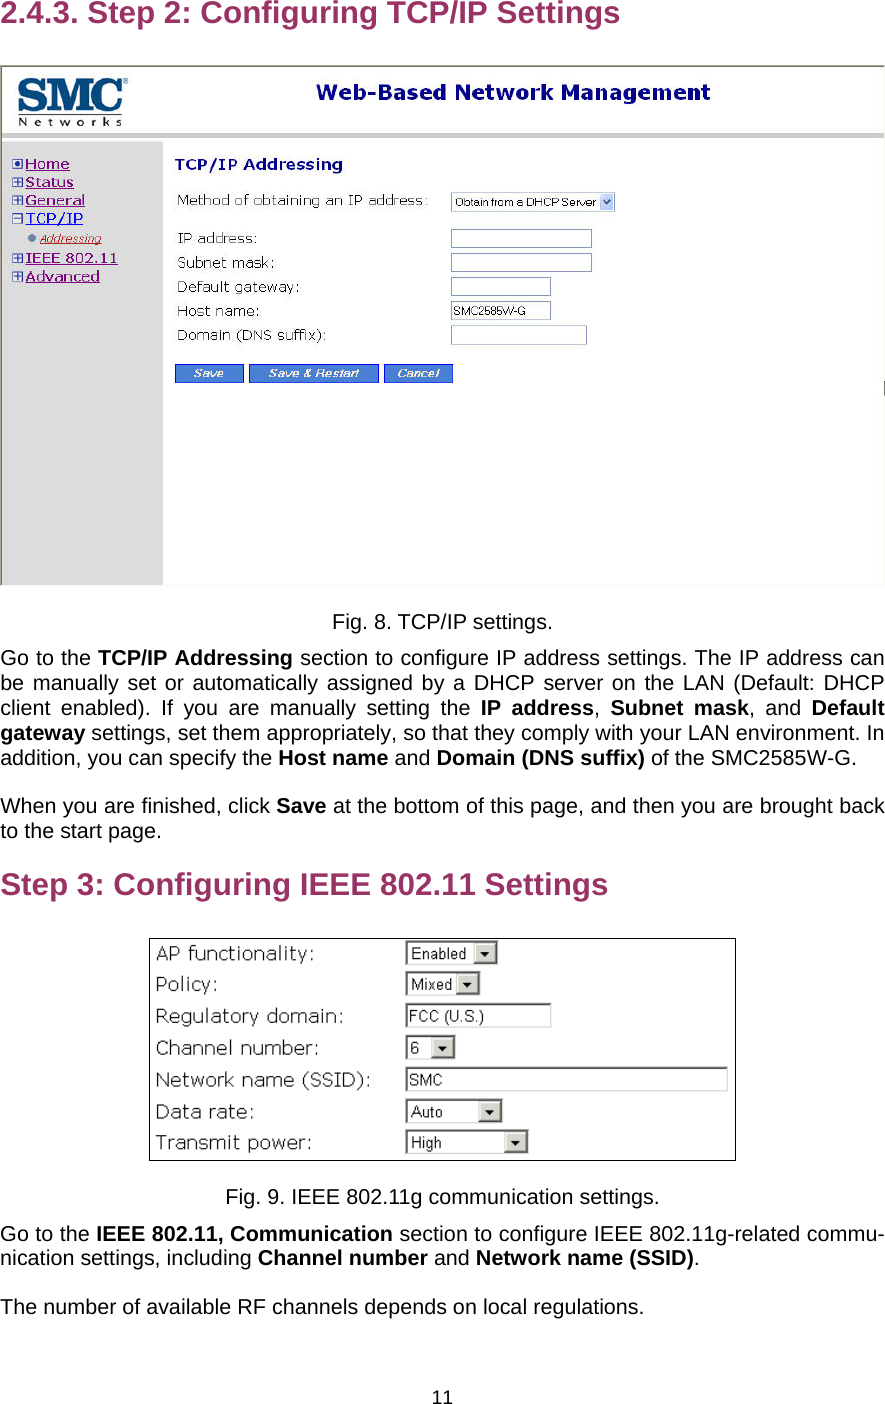   112.4.3. Step 2: Configuring TCP/IP Settings  Fig. 8. TCP/IP settings. Go to the TCP/IP Addressing section to configure IP address settings. The IP address can be manually set or automatically assigned by a DHCP server on the LAN (Default: DHCP client enabled). If you are manually setting the IP address,  Subnet mask, and Default gateway settings, set them appropriately, so that they comply with your LAN environment. In addition, you can specify the Host name and Domain (DNS suffix) of the SMC2585W-G. When you are finished, click Save at the bottom of this page, and then you are brought back to the start page. Step 3: Configuring IEEE 802.11 Settings  Fig. 9. IEEE 802.11g communication settings. Go to the IEEE 802.11, Communication section to configure IEEE 802.11g-related commu-nication settings, including Channel number and Network name (SSID). The number of available RF channels depends on local regulations. 